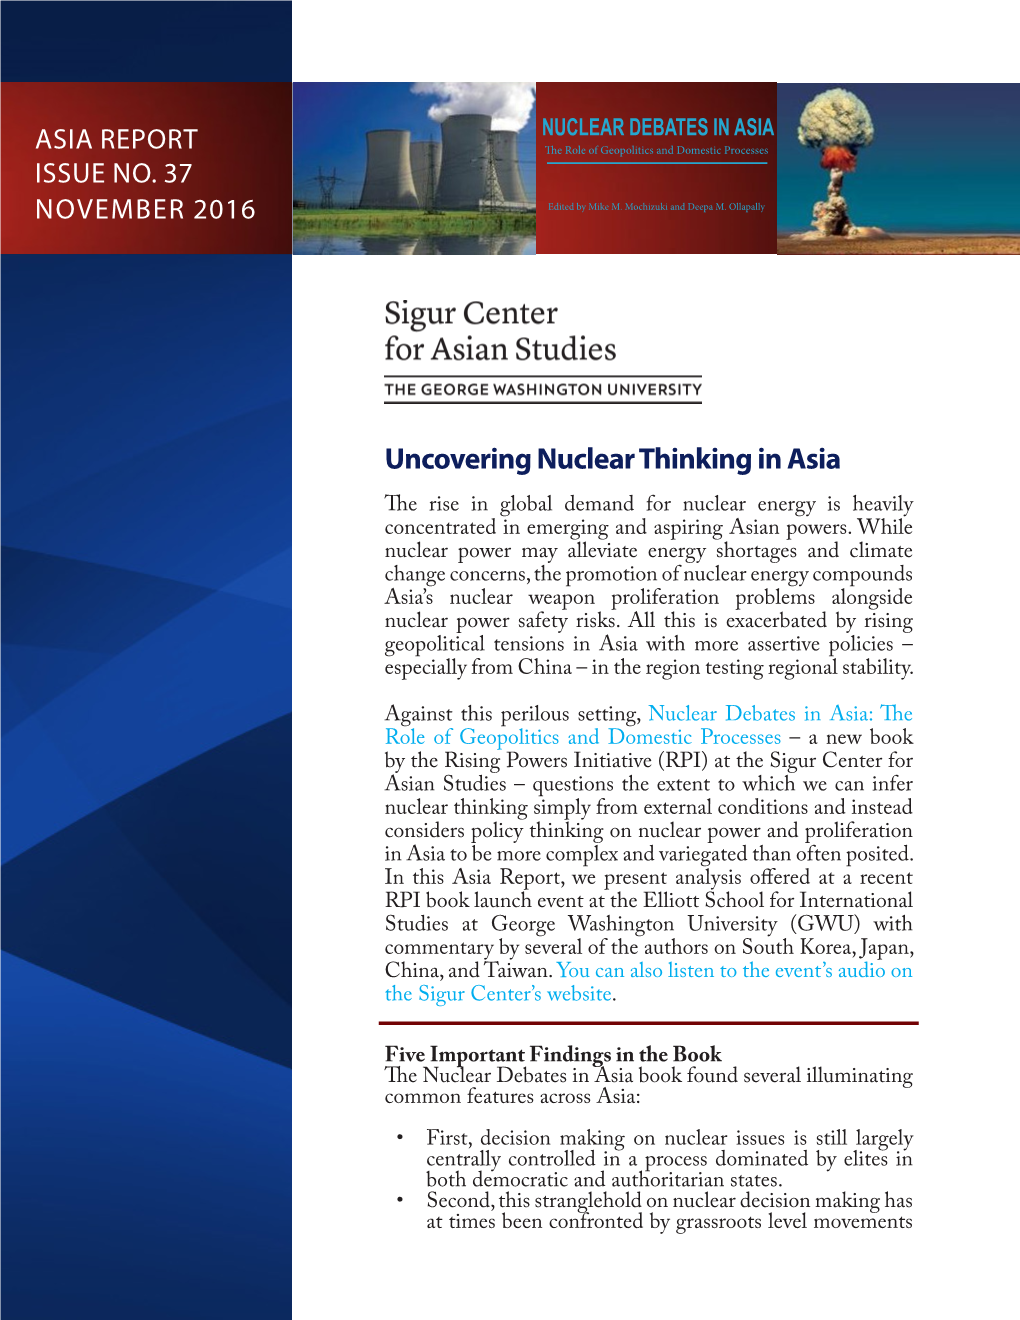 Uncovering Nuclear Thinking in Asia